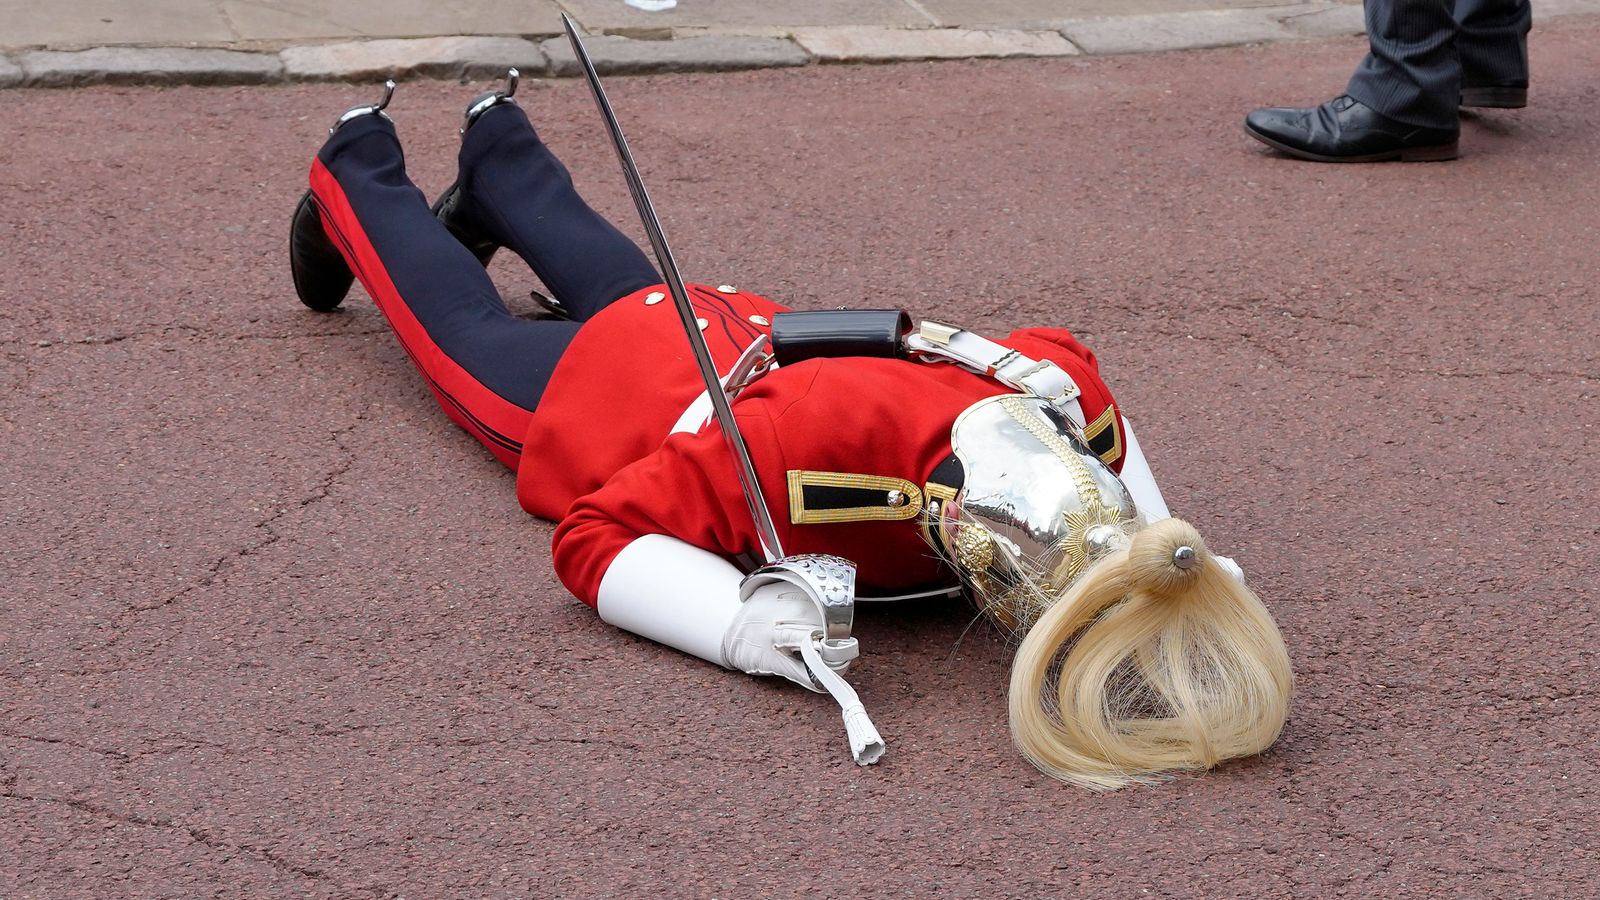 Soldier helped by police after fainting at King's first Order of